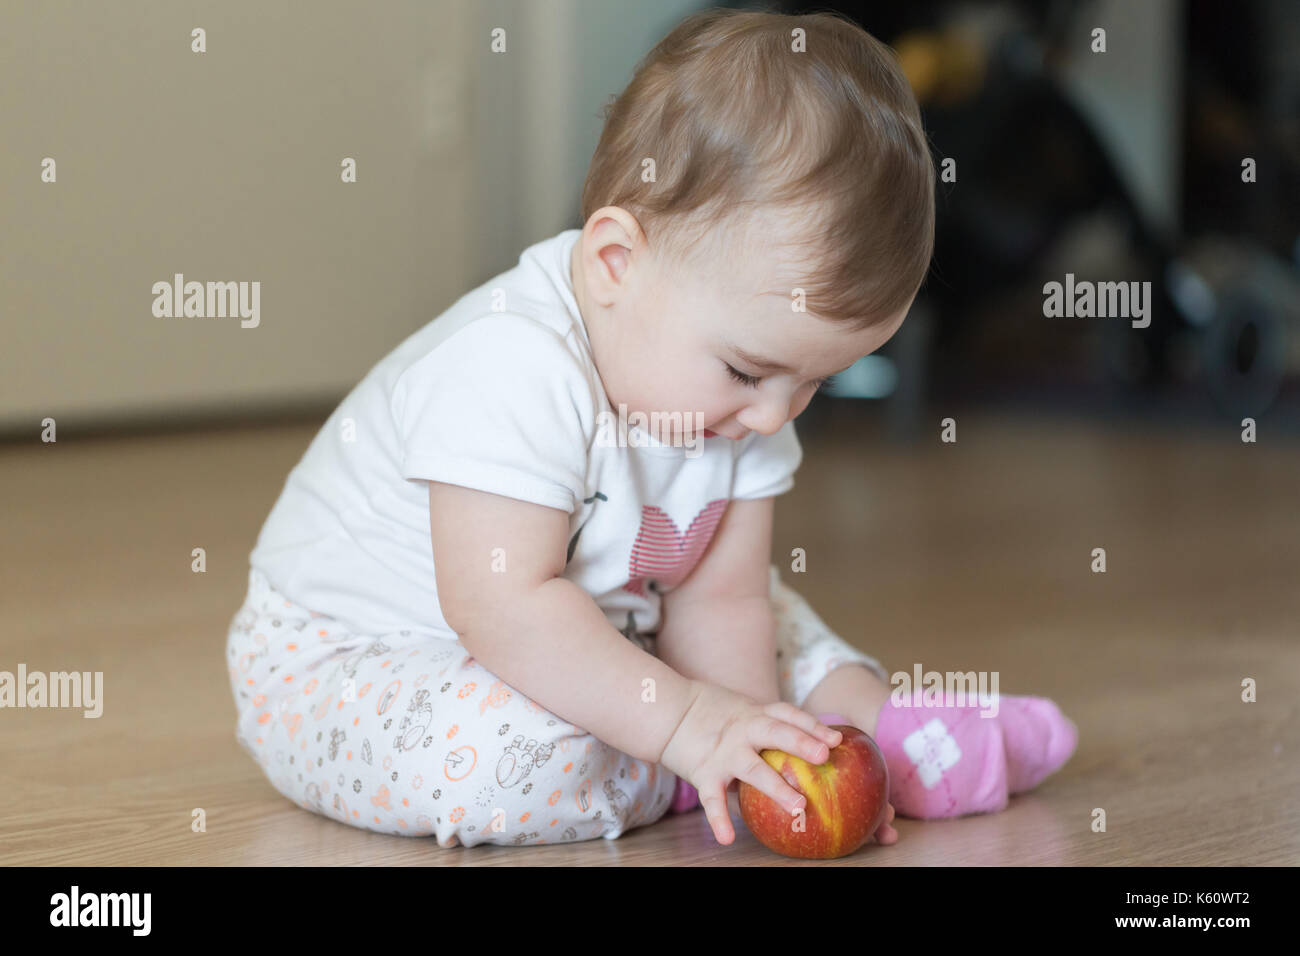 Little child sitting at home on the floor with a red apple. Stock Photo